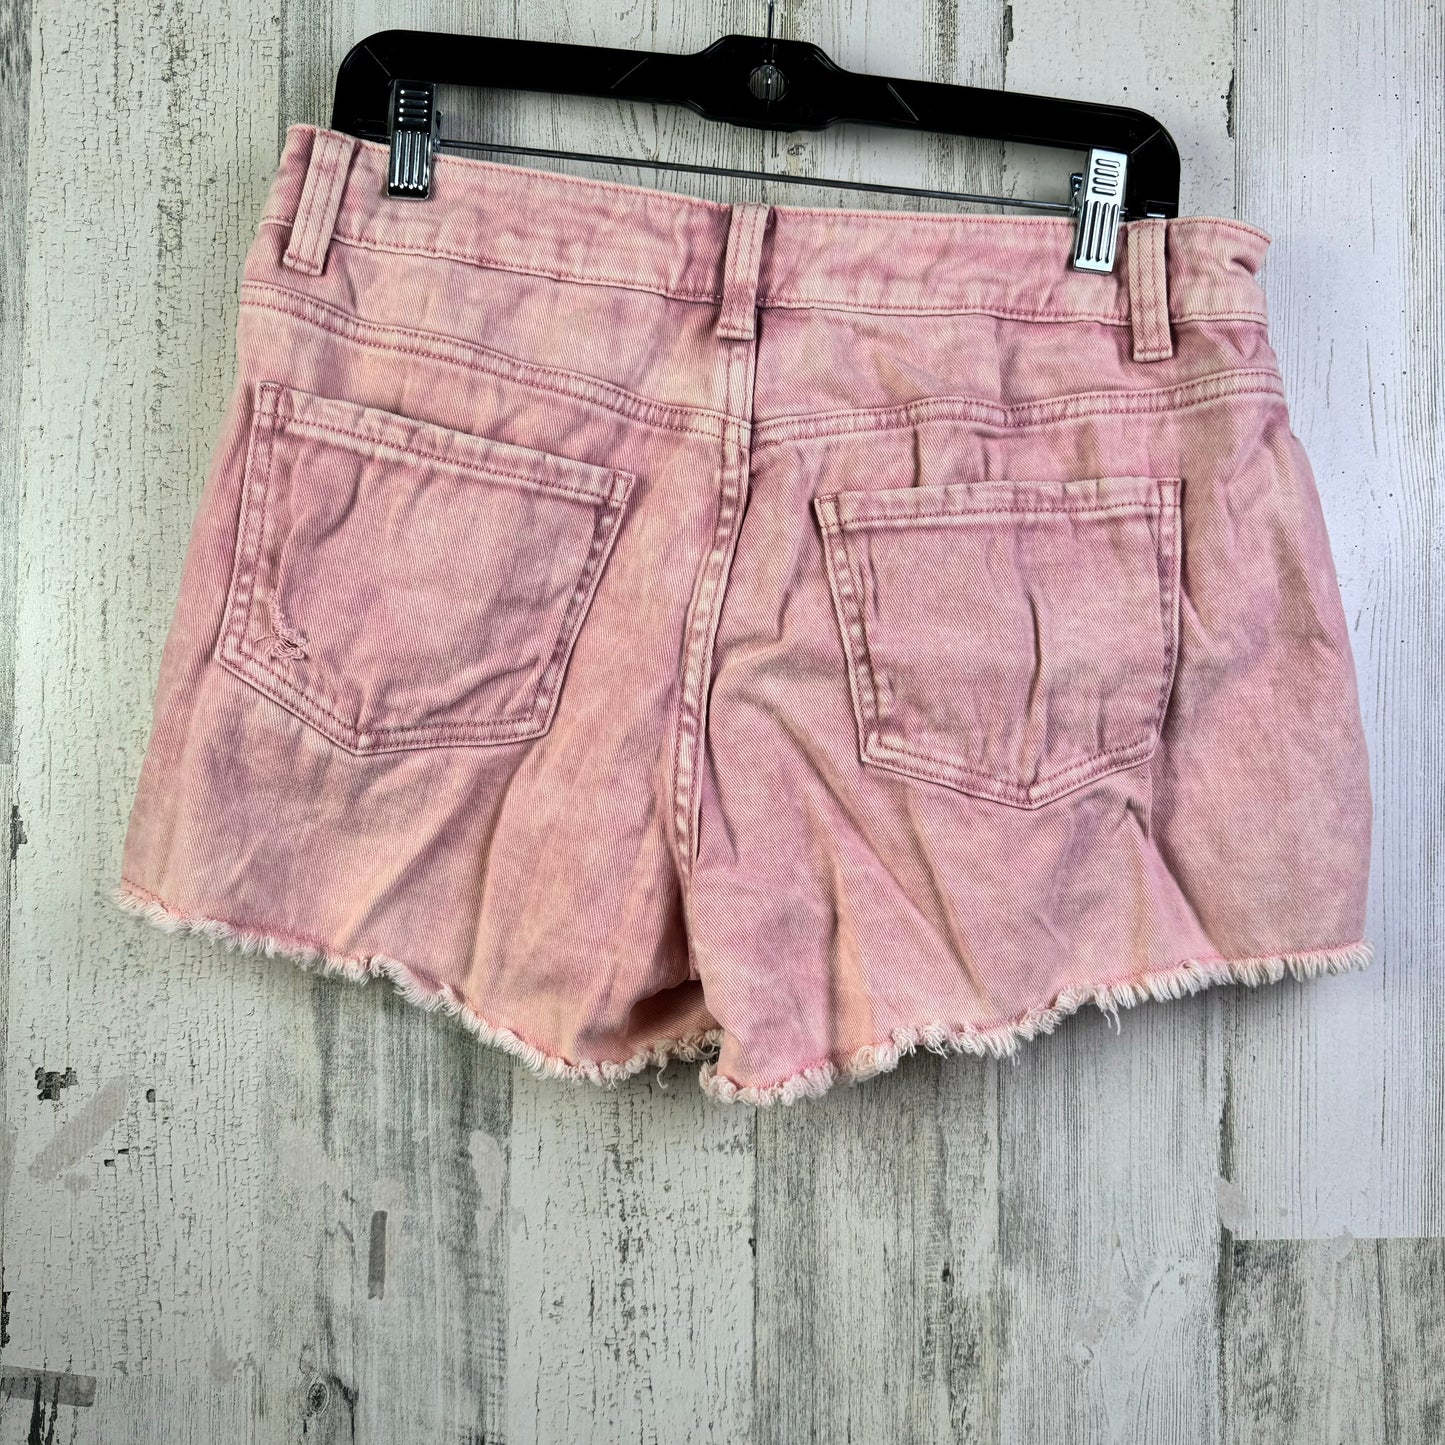 Pink Denim Shorts Time And Tru, Size 8